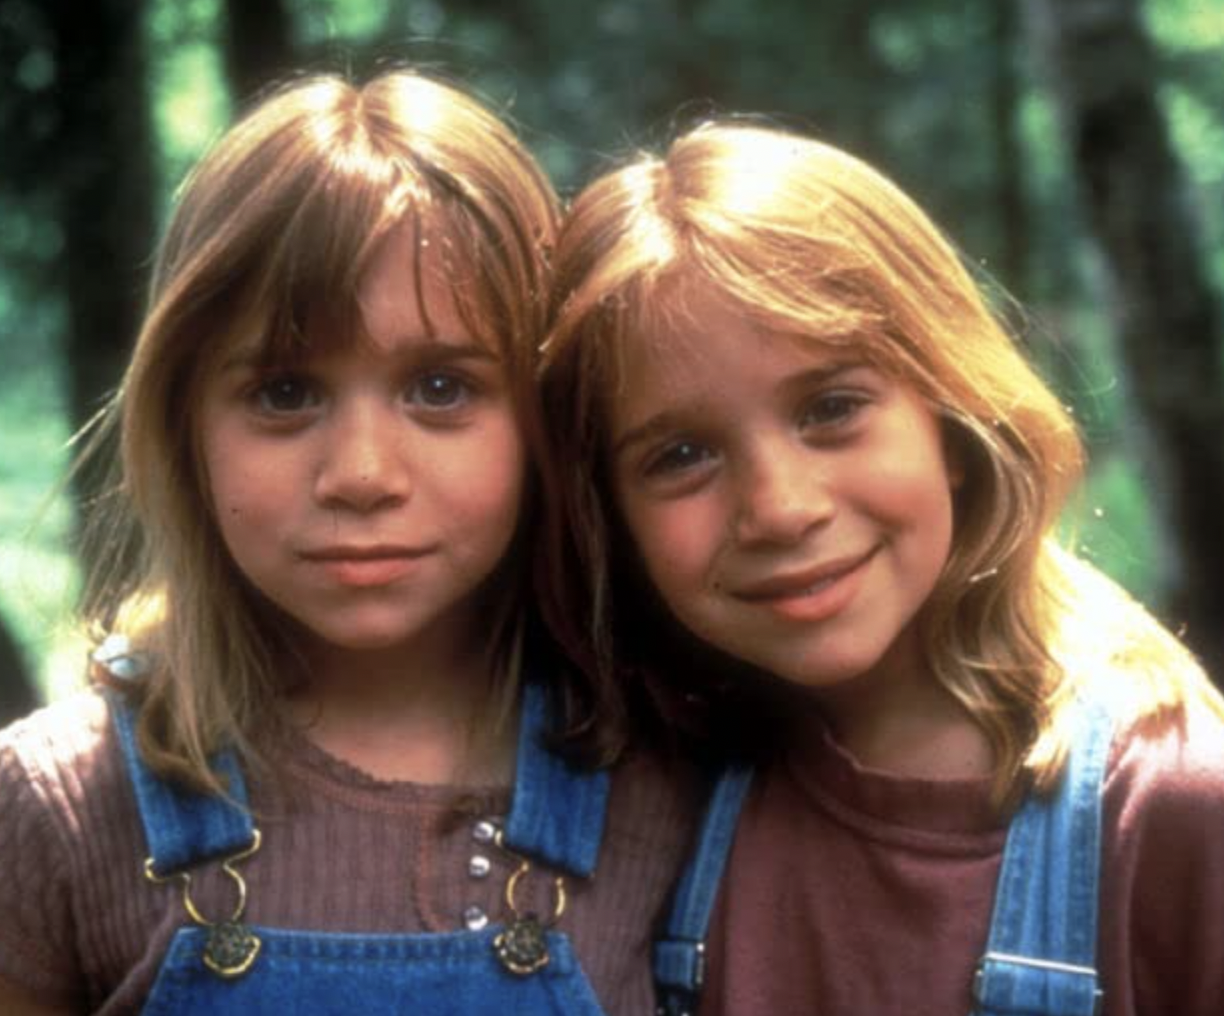 17. Mary-Kate and Ashley Olsen were everyone’s first choice to play Matilda...